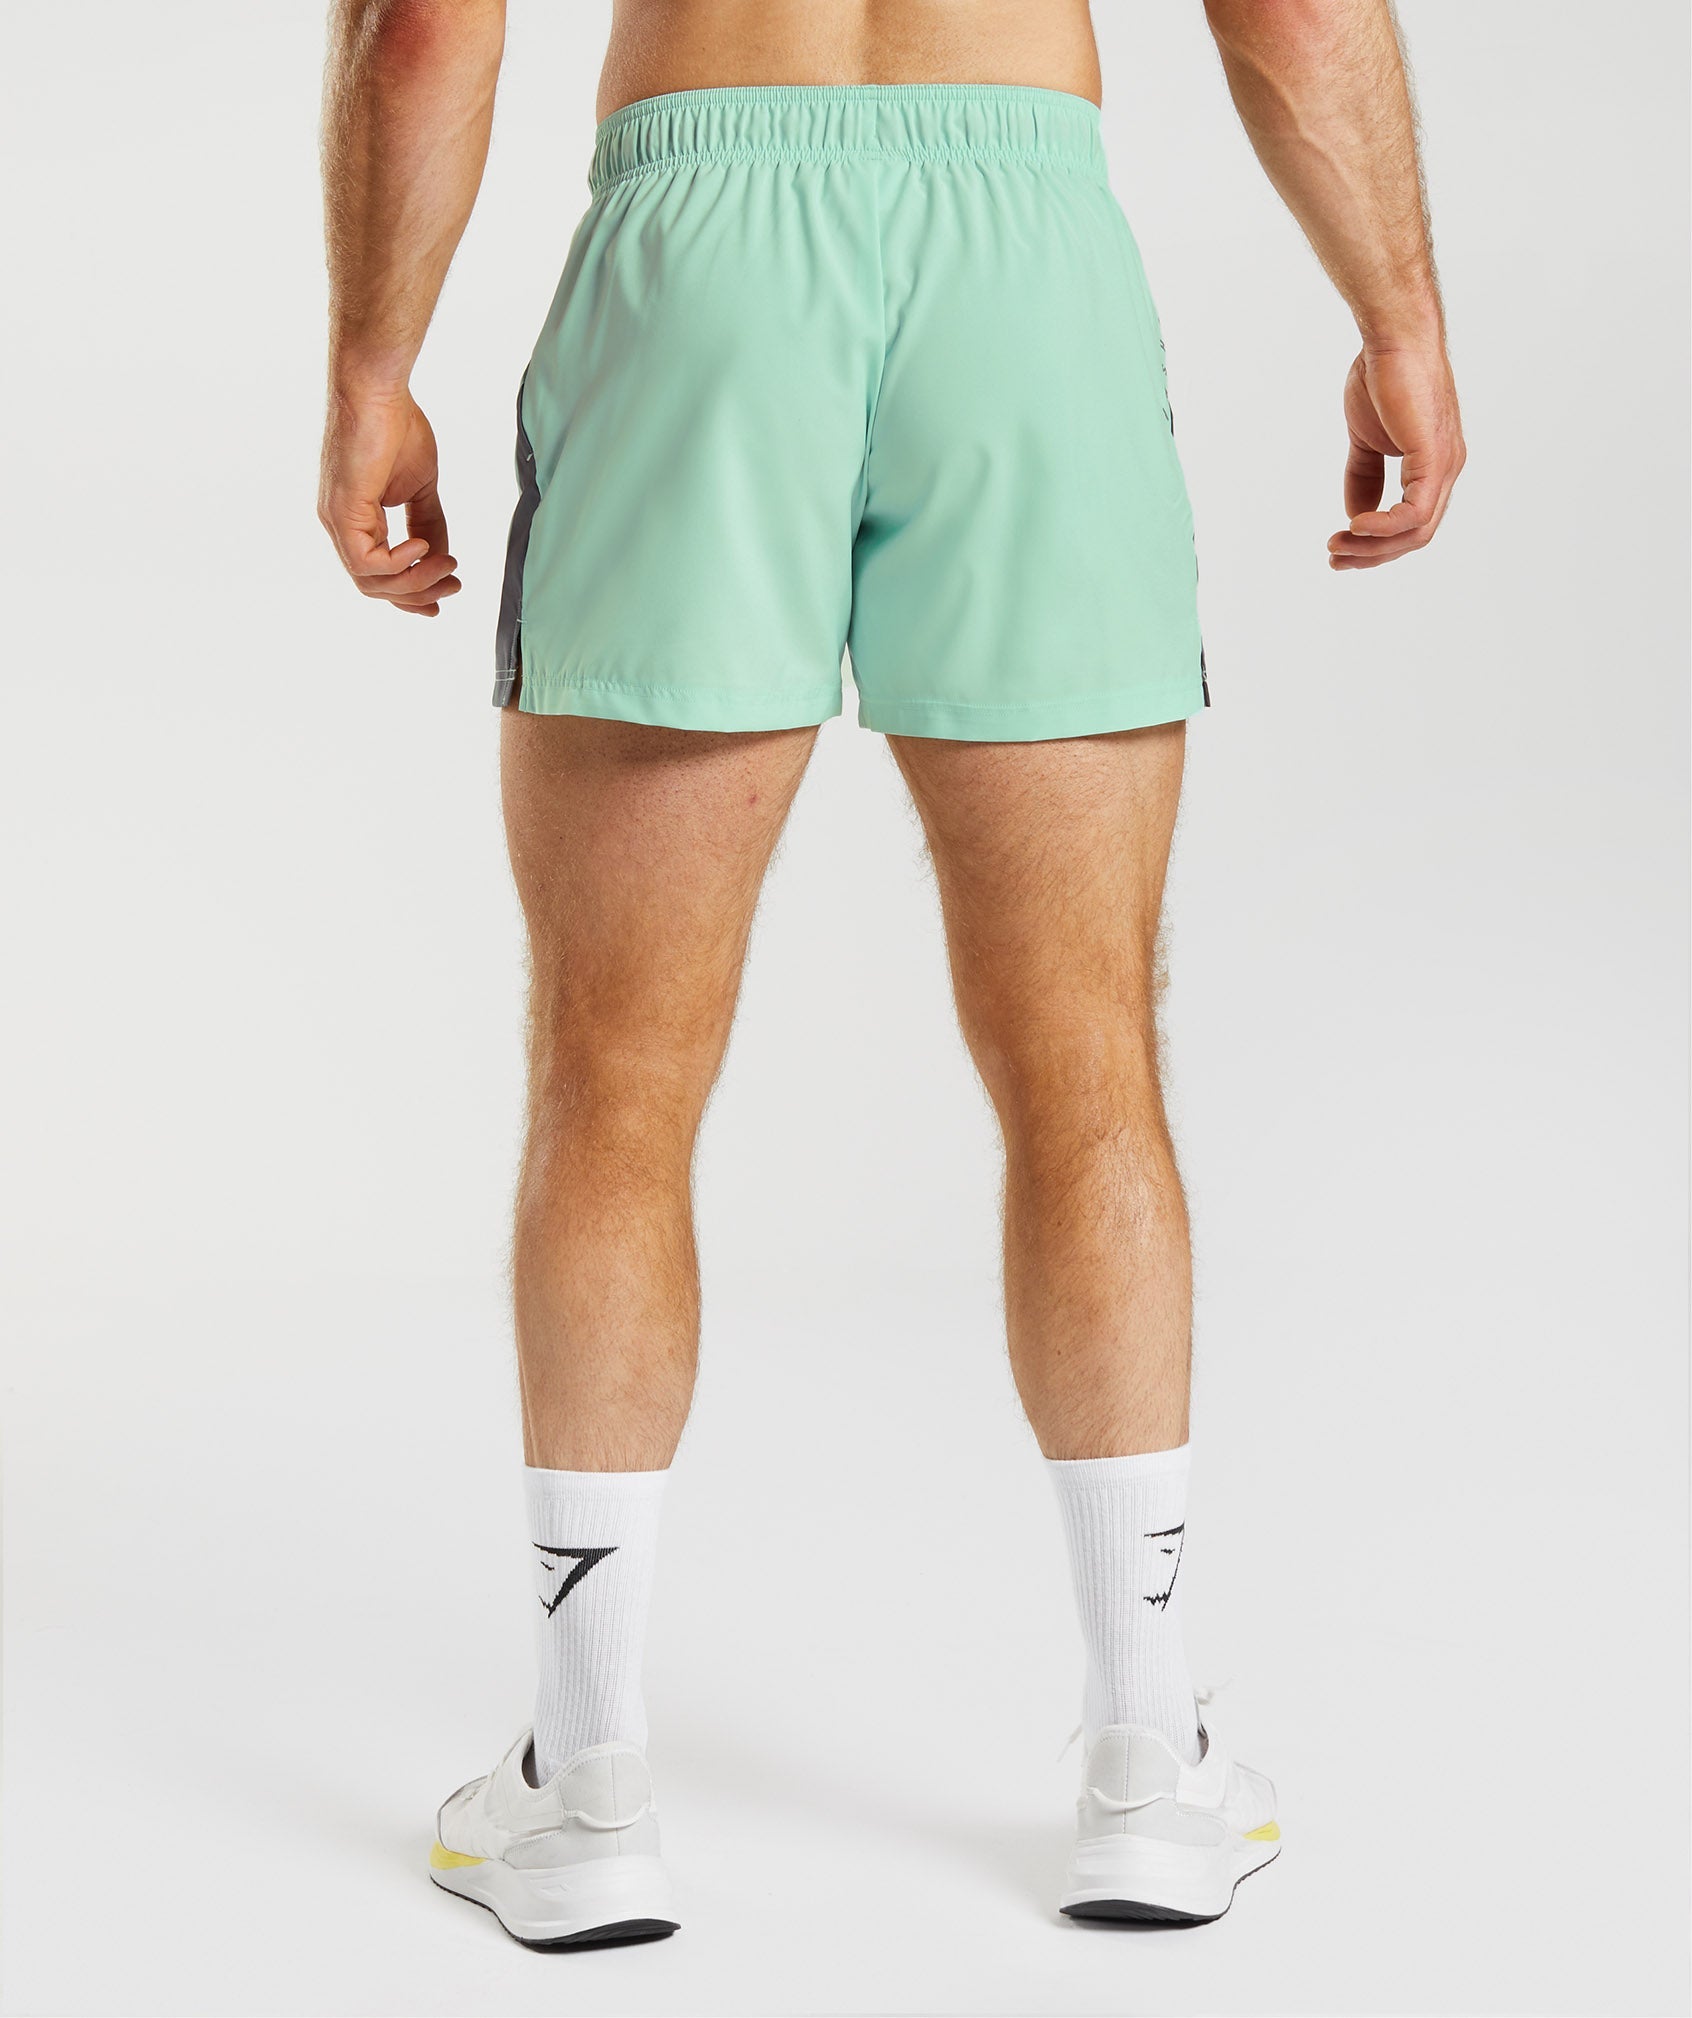 Sport 5" Shorts in Pastel Green/Silhouette Grey - view 2